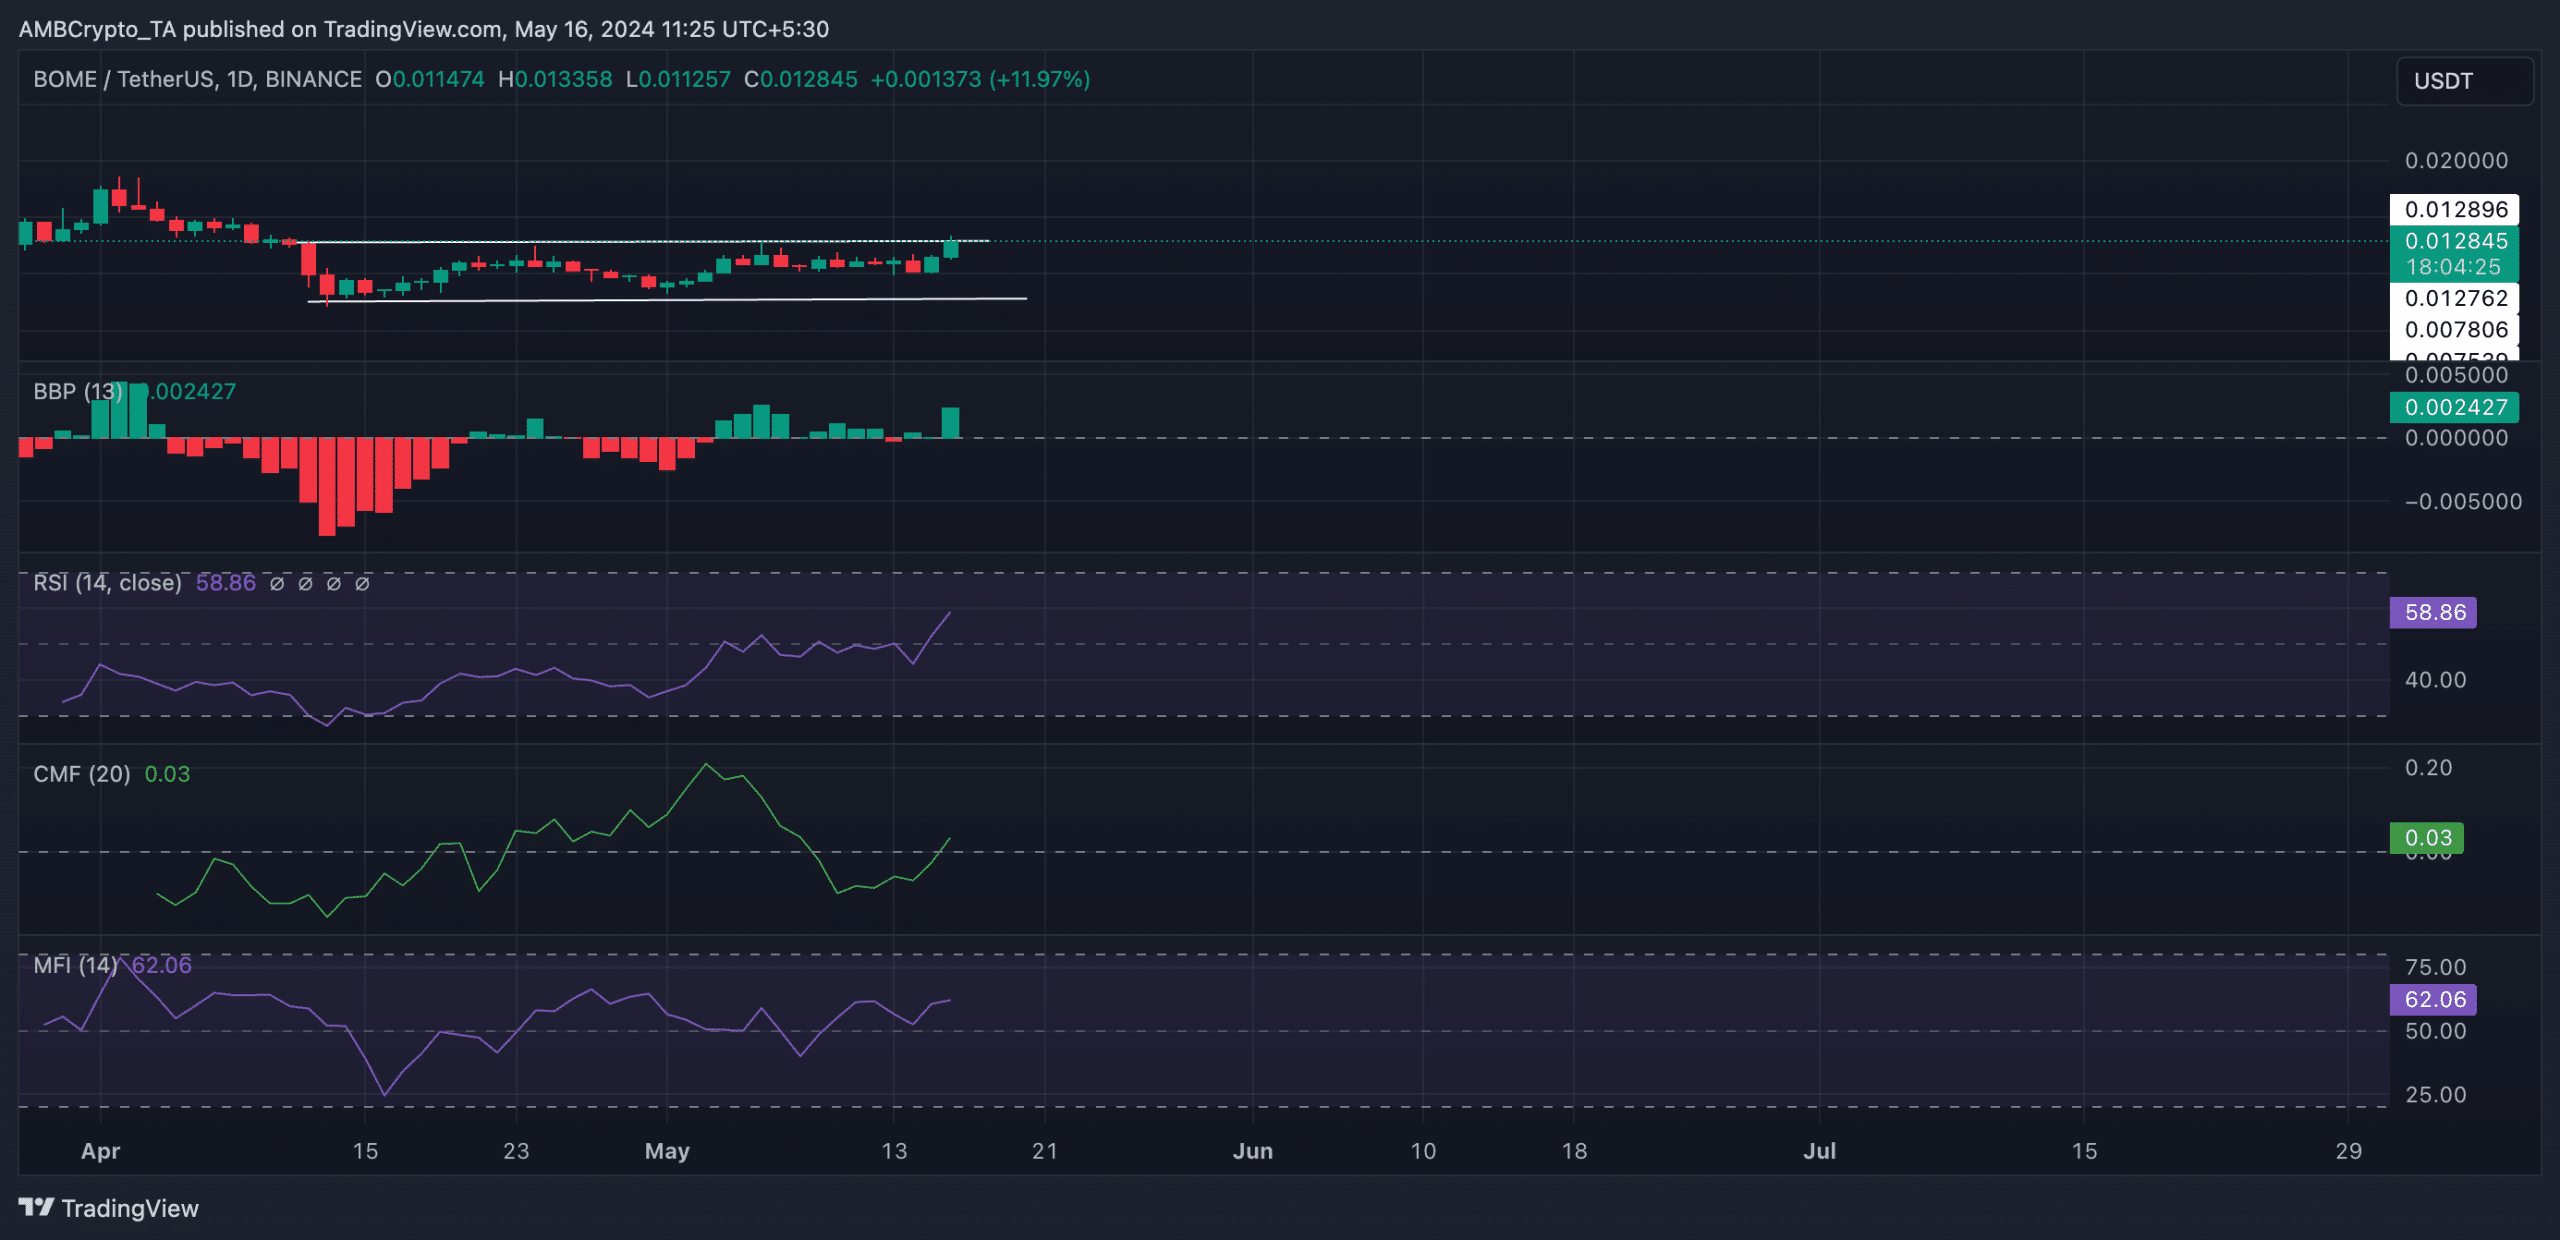 BOME 1-Day chart TradingView